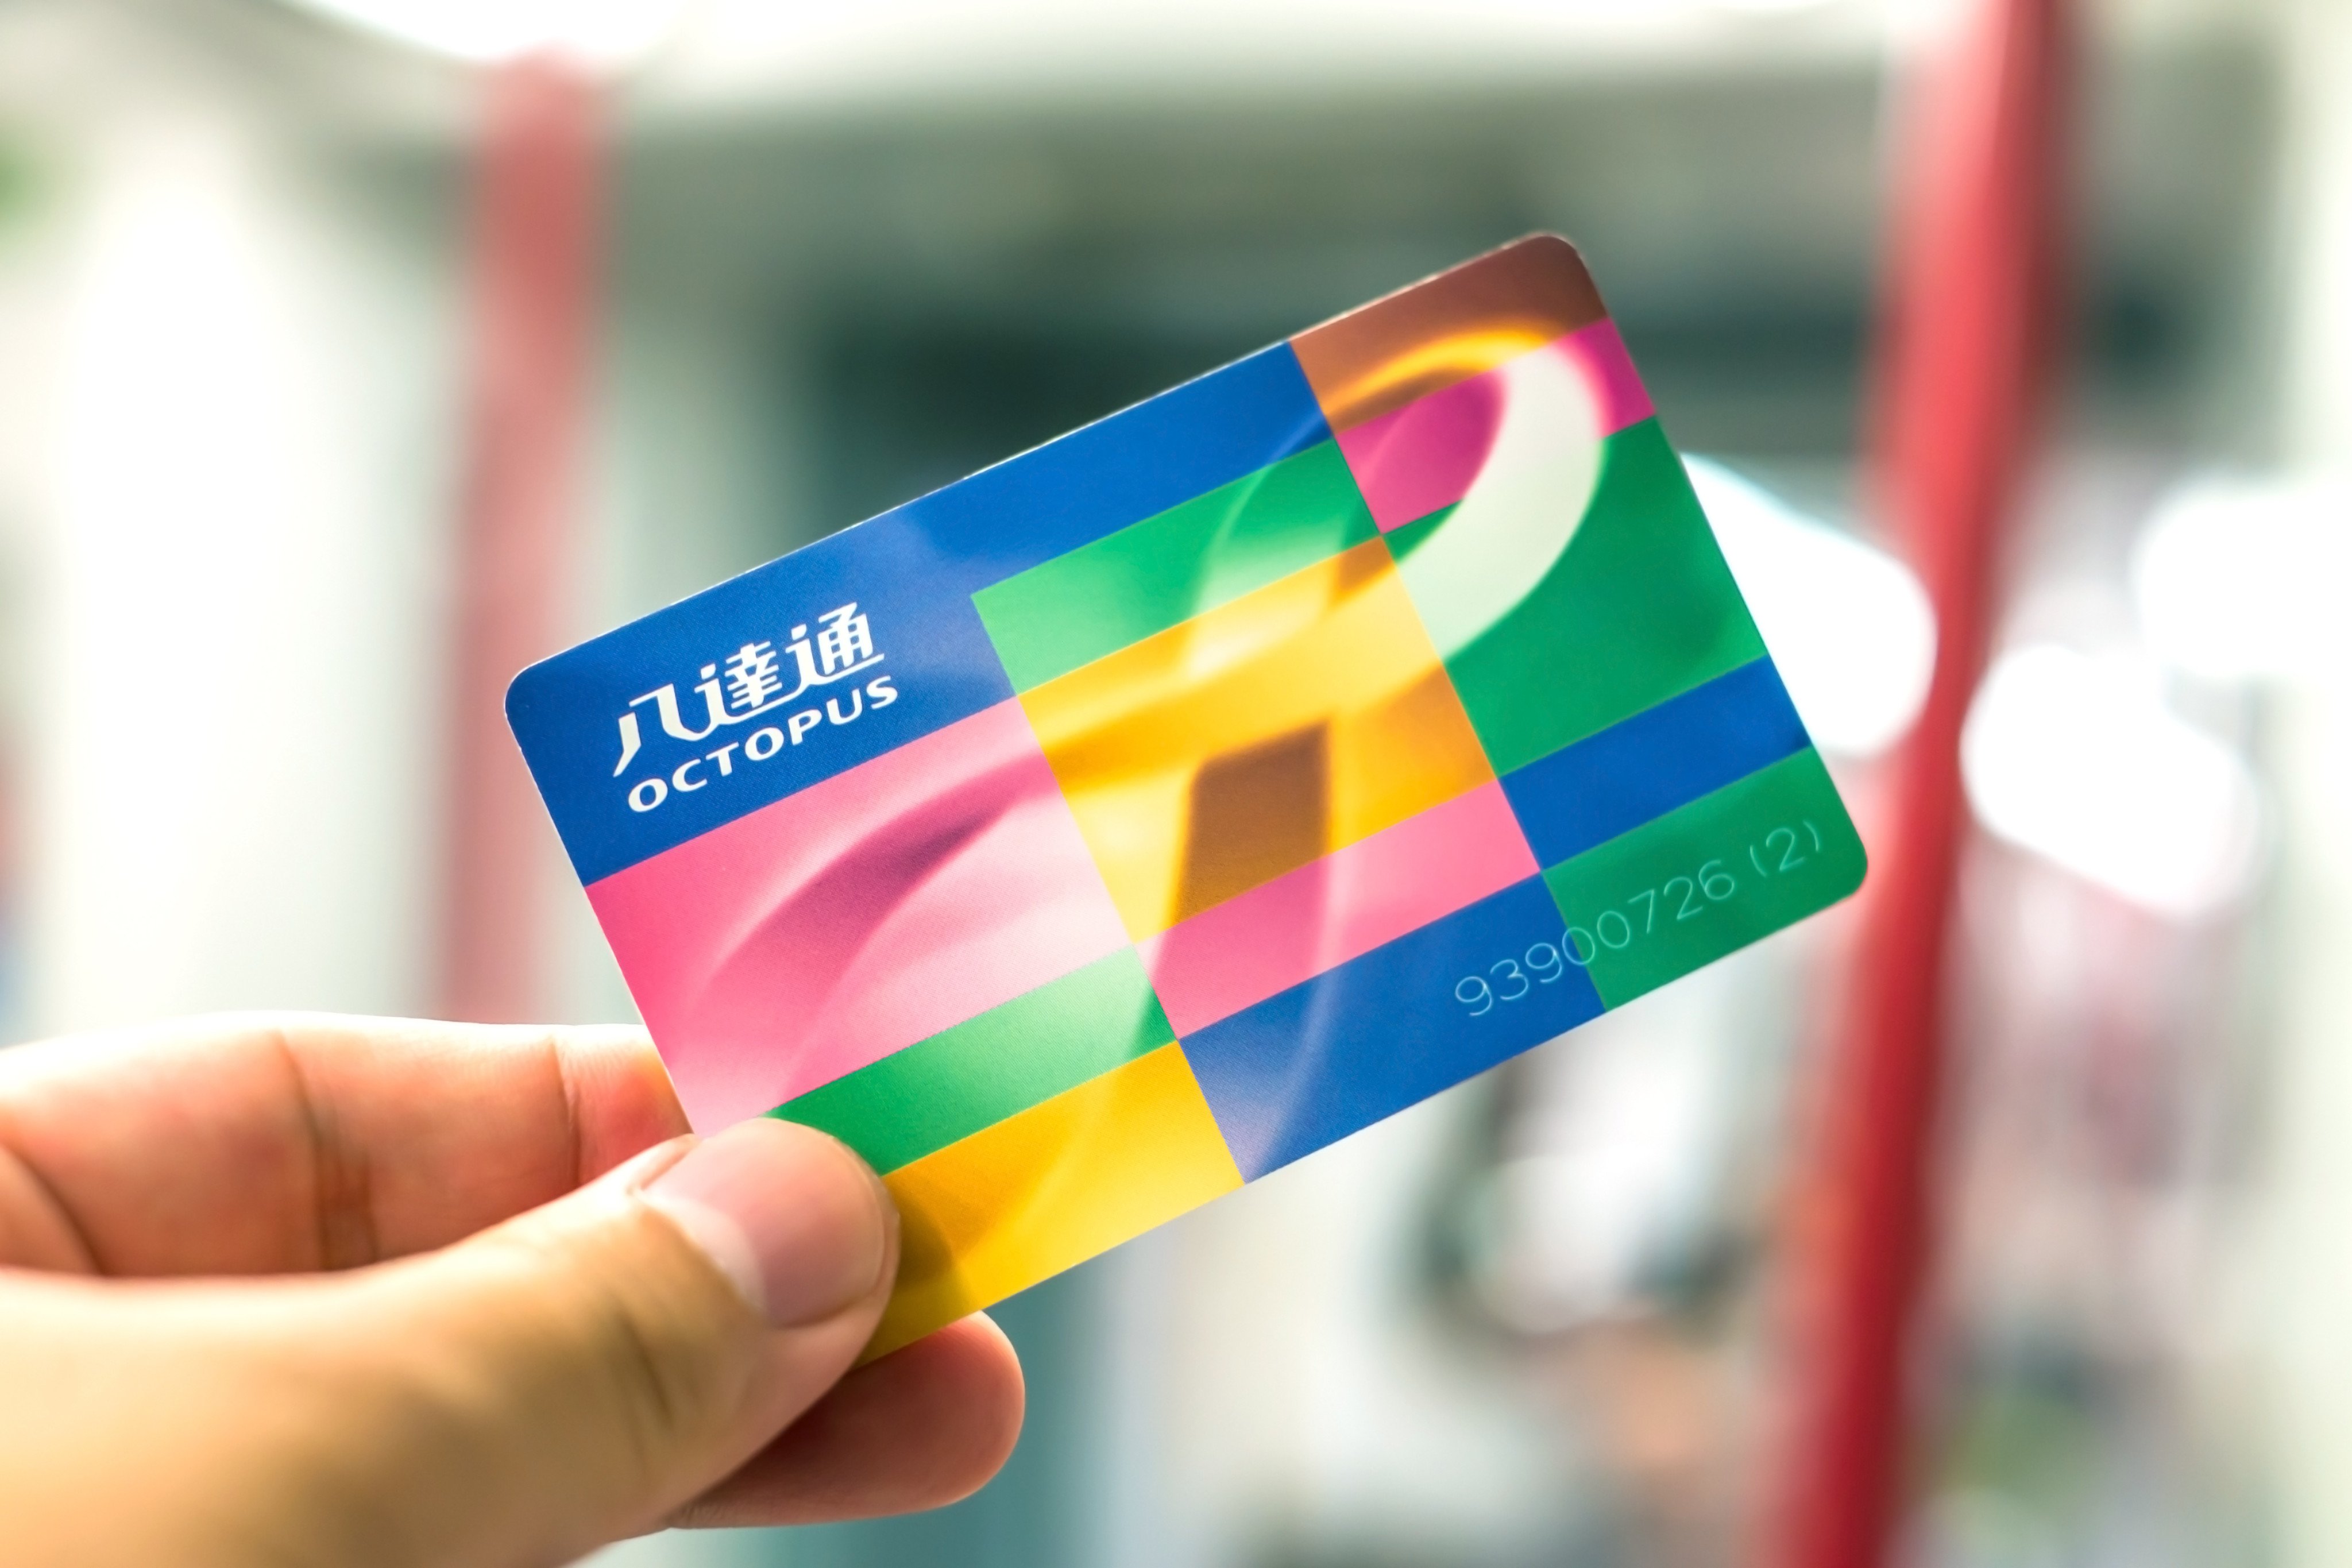 The Octopus stored value card is ubiquitous in Hong Kong. Why not open up the extensive network of Octopus card readers to other mobile payment companies? Photo: Sutterstock